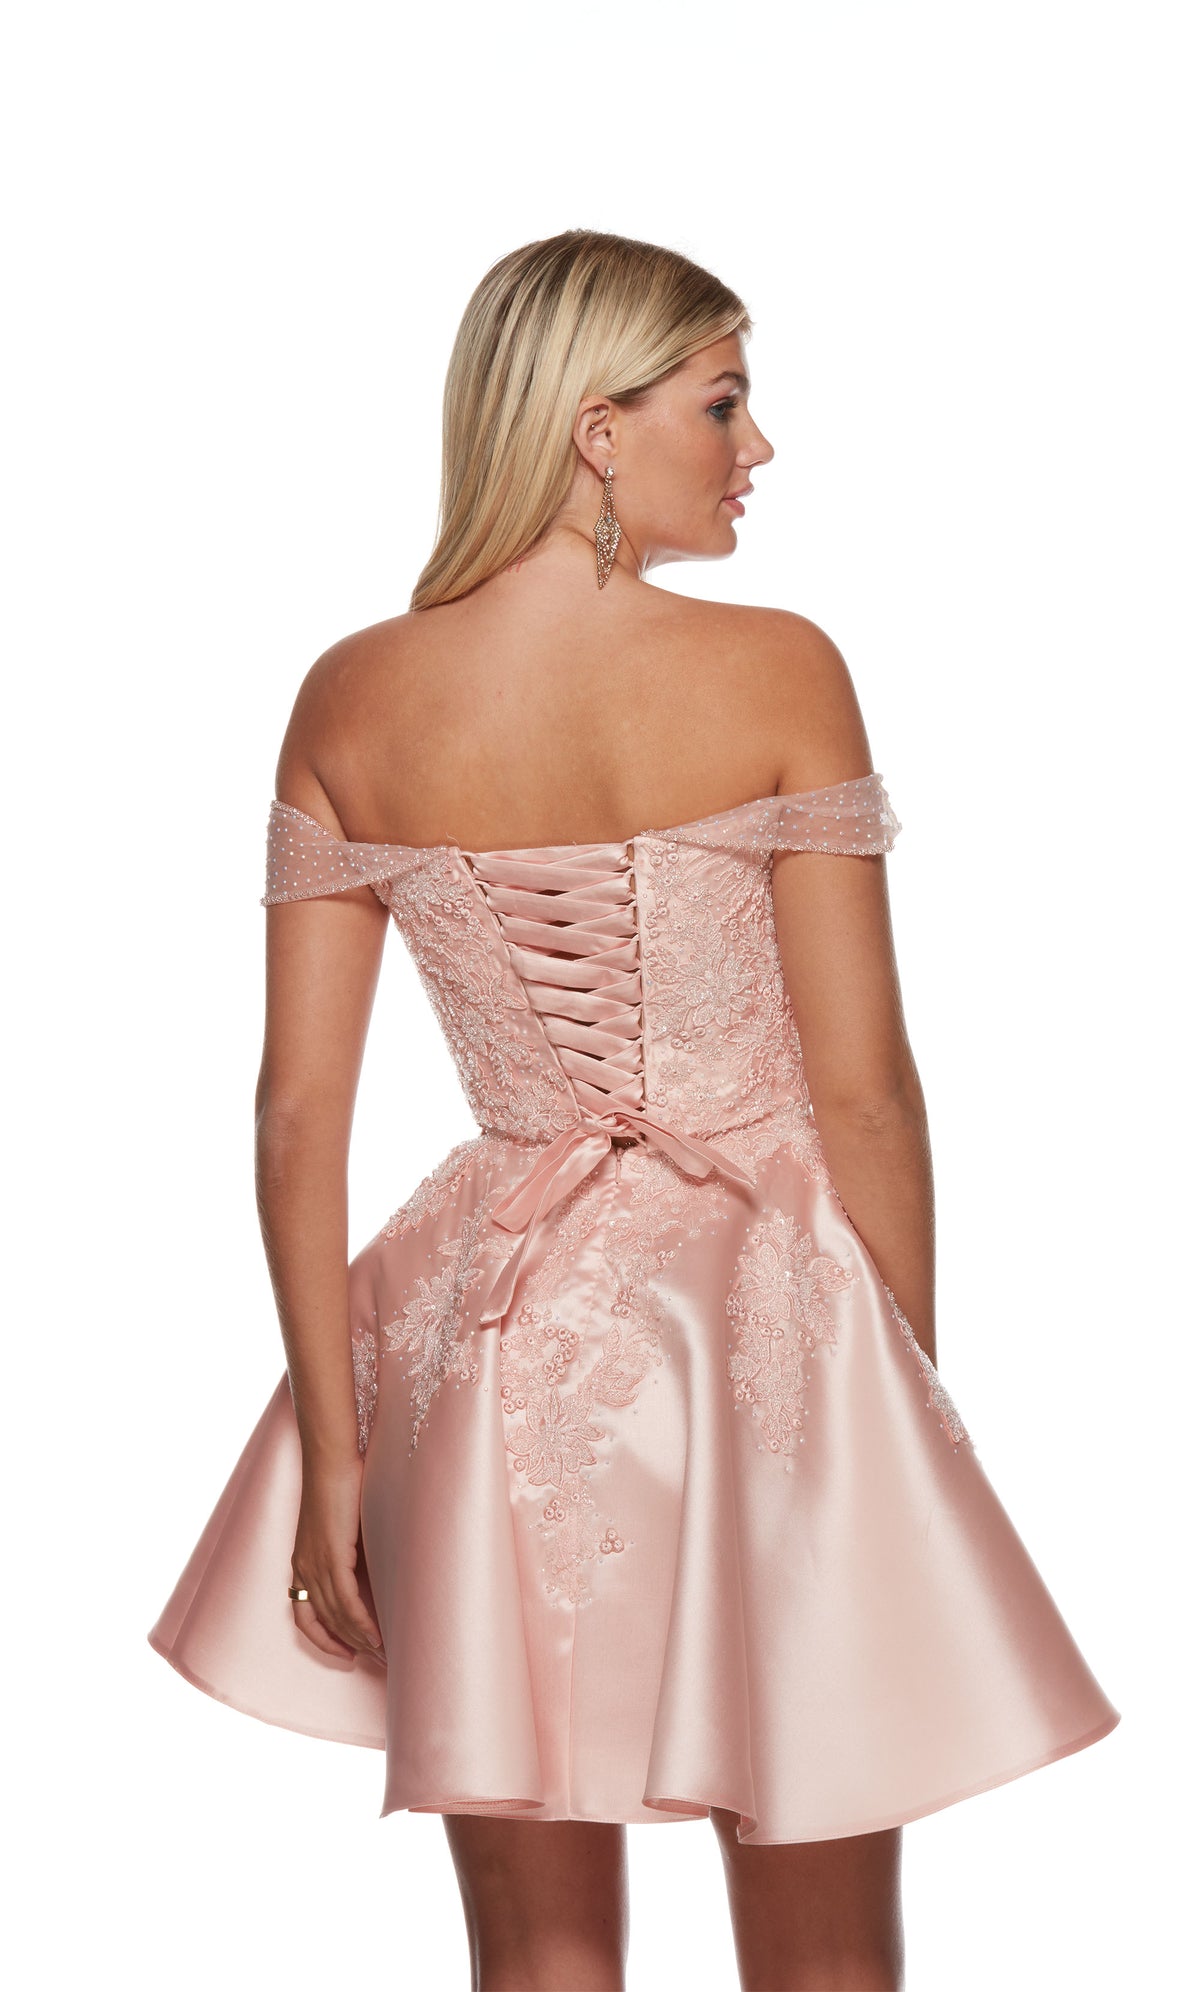 An elegant and chic short formal dress, showcasing an off-the-shoulder neckline, a fitted, lace-up bodice, and a flare skirt, designed to make a stylish statement.